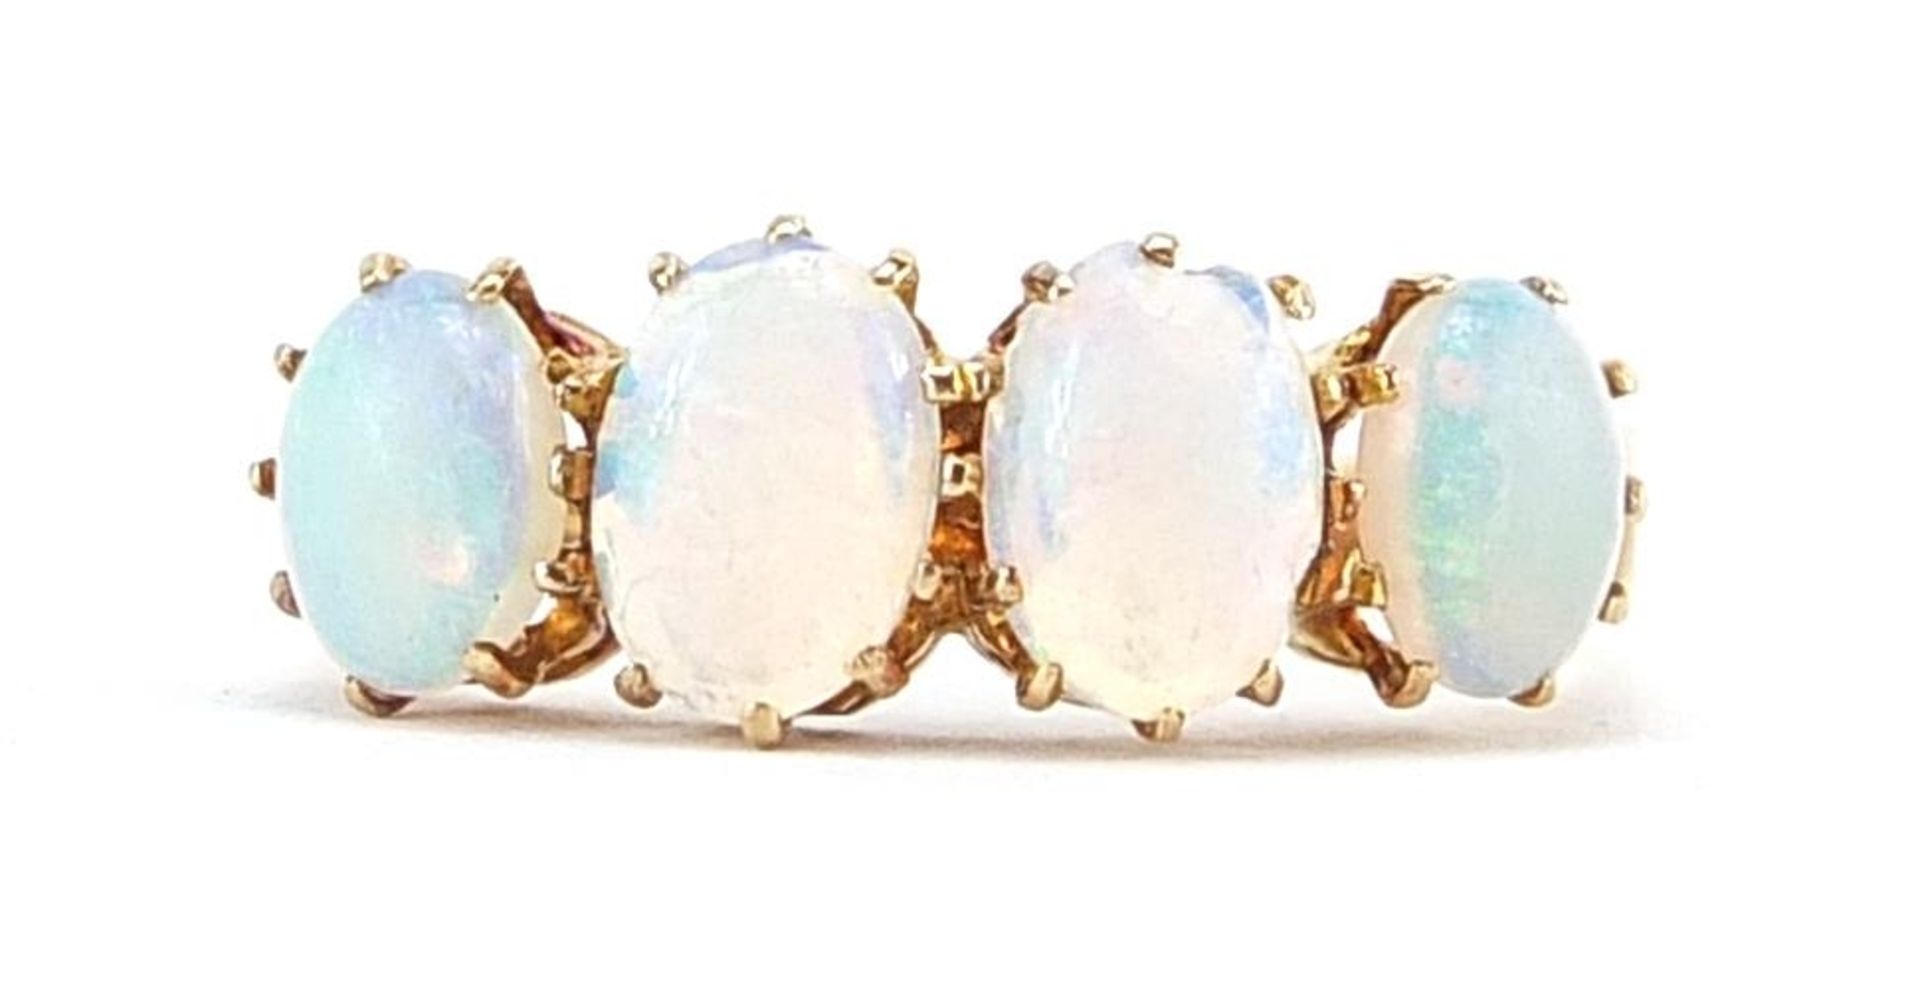 15ct gold cabochon opal four stone ring, size J, 2.0g